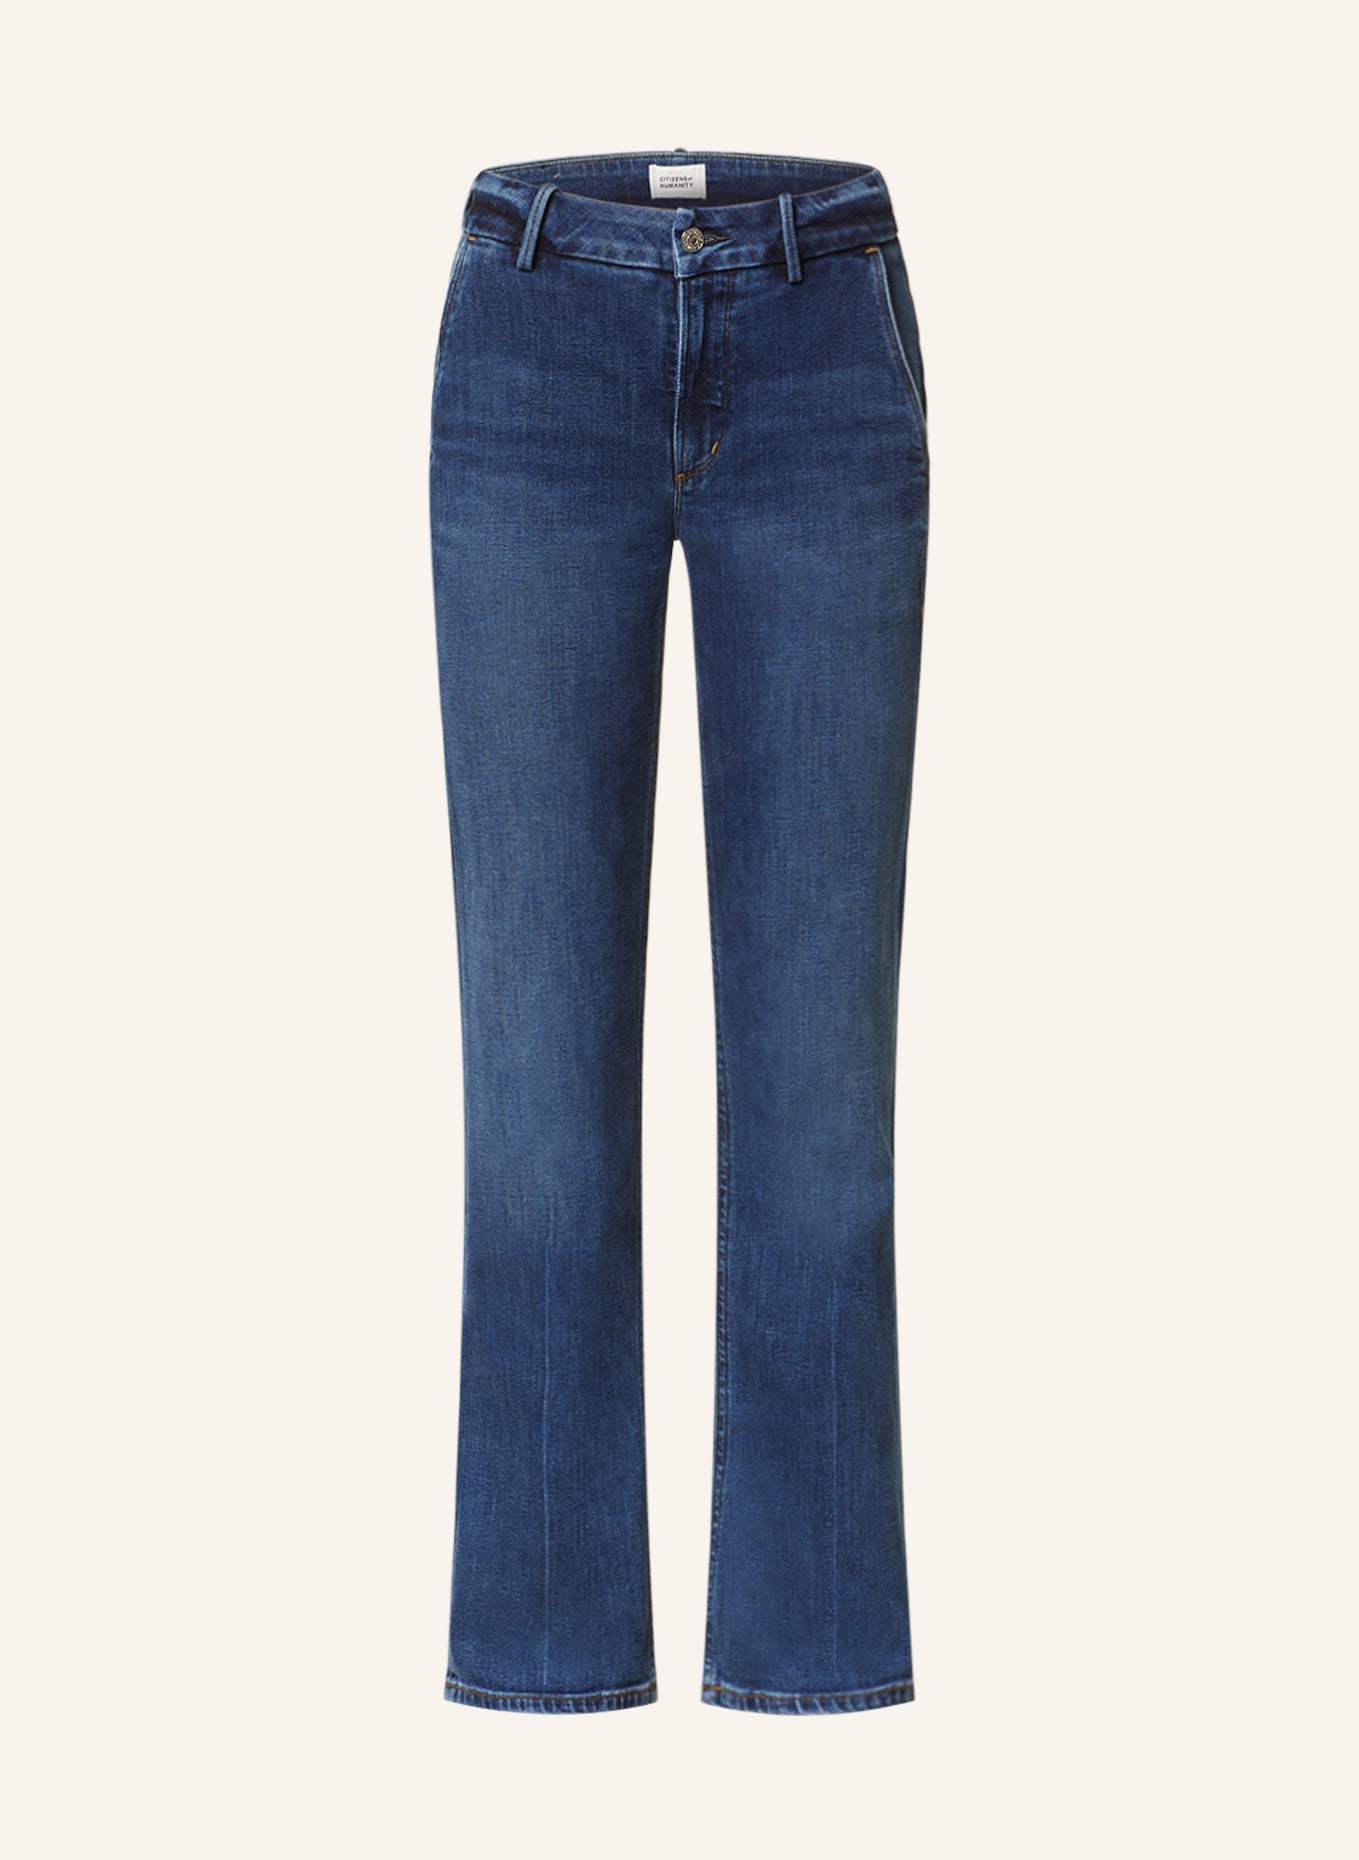 CITIZENS of HUMANITY Jeans, Farbe: Archer med ind (Bild 1)